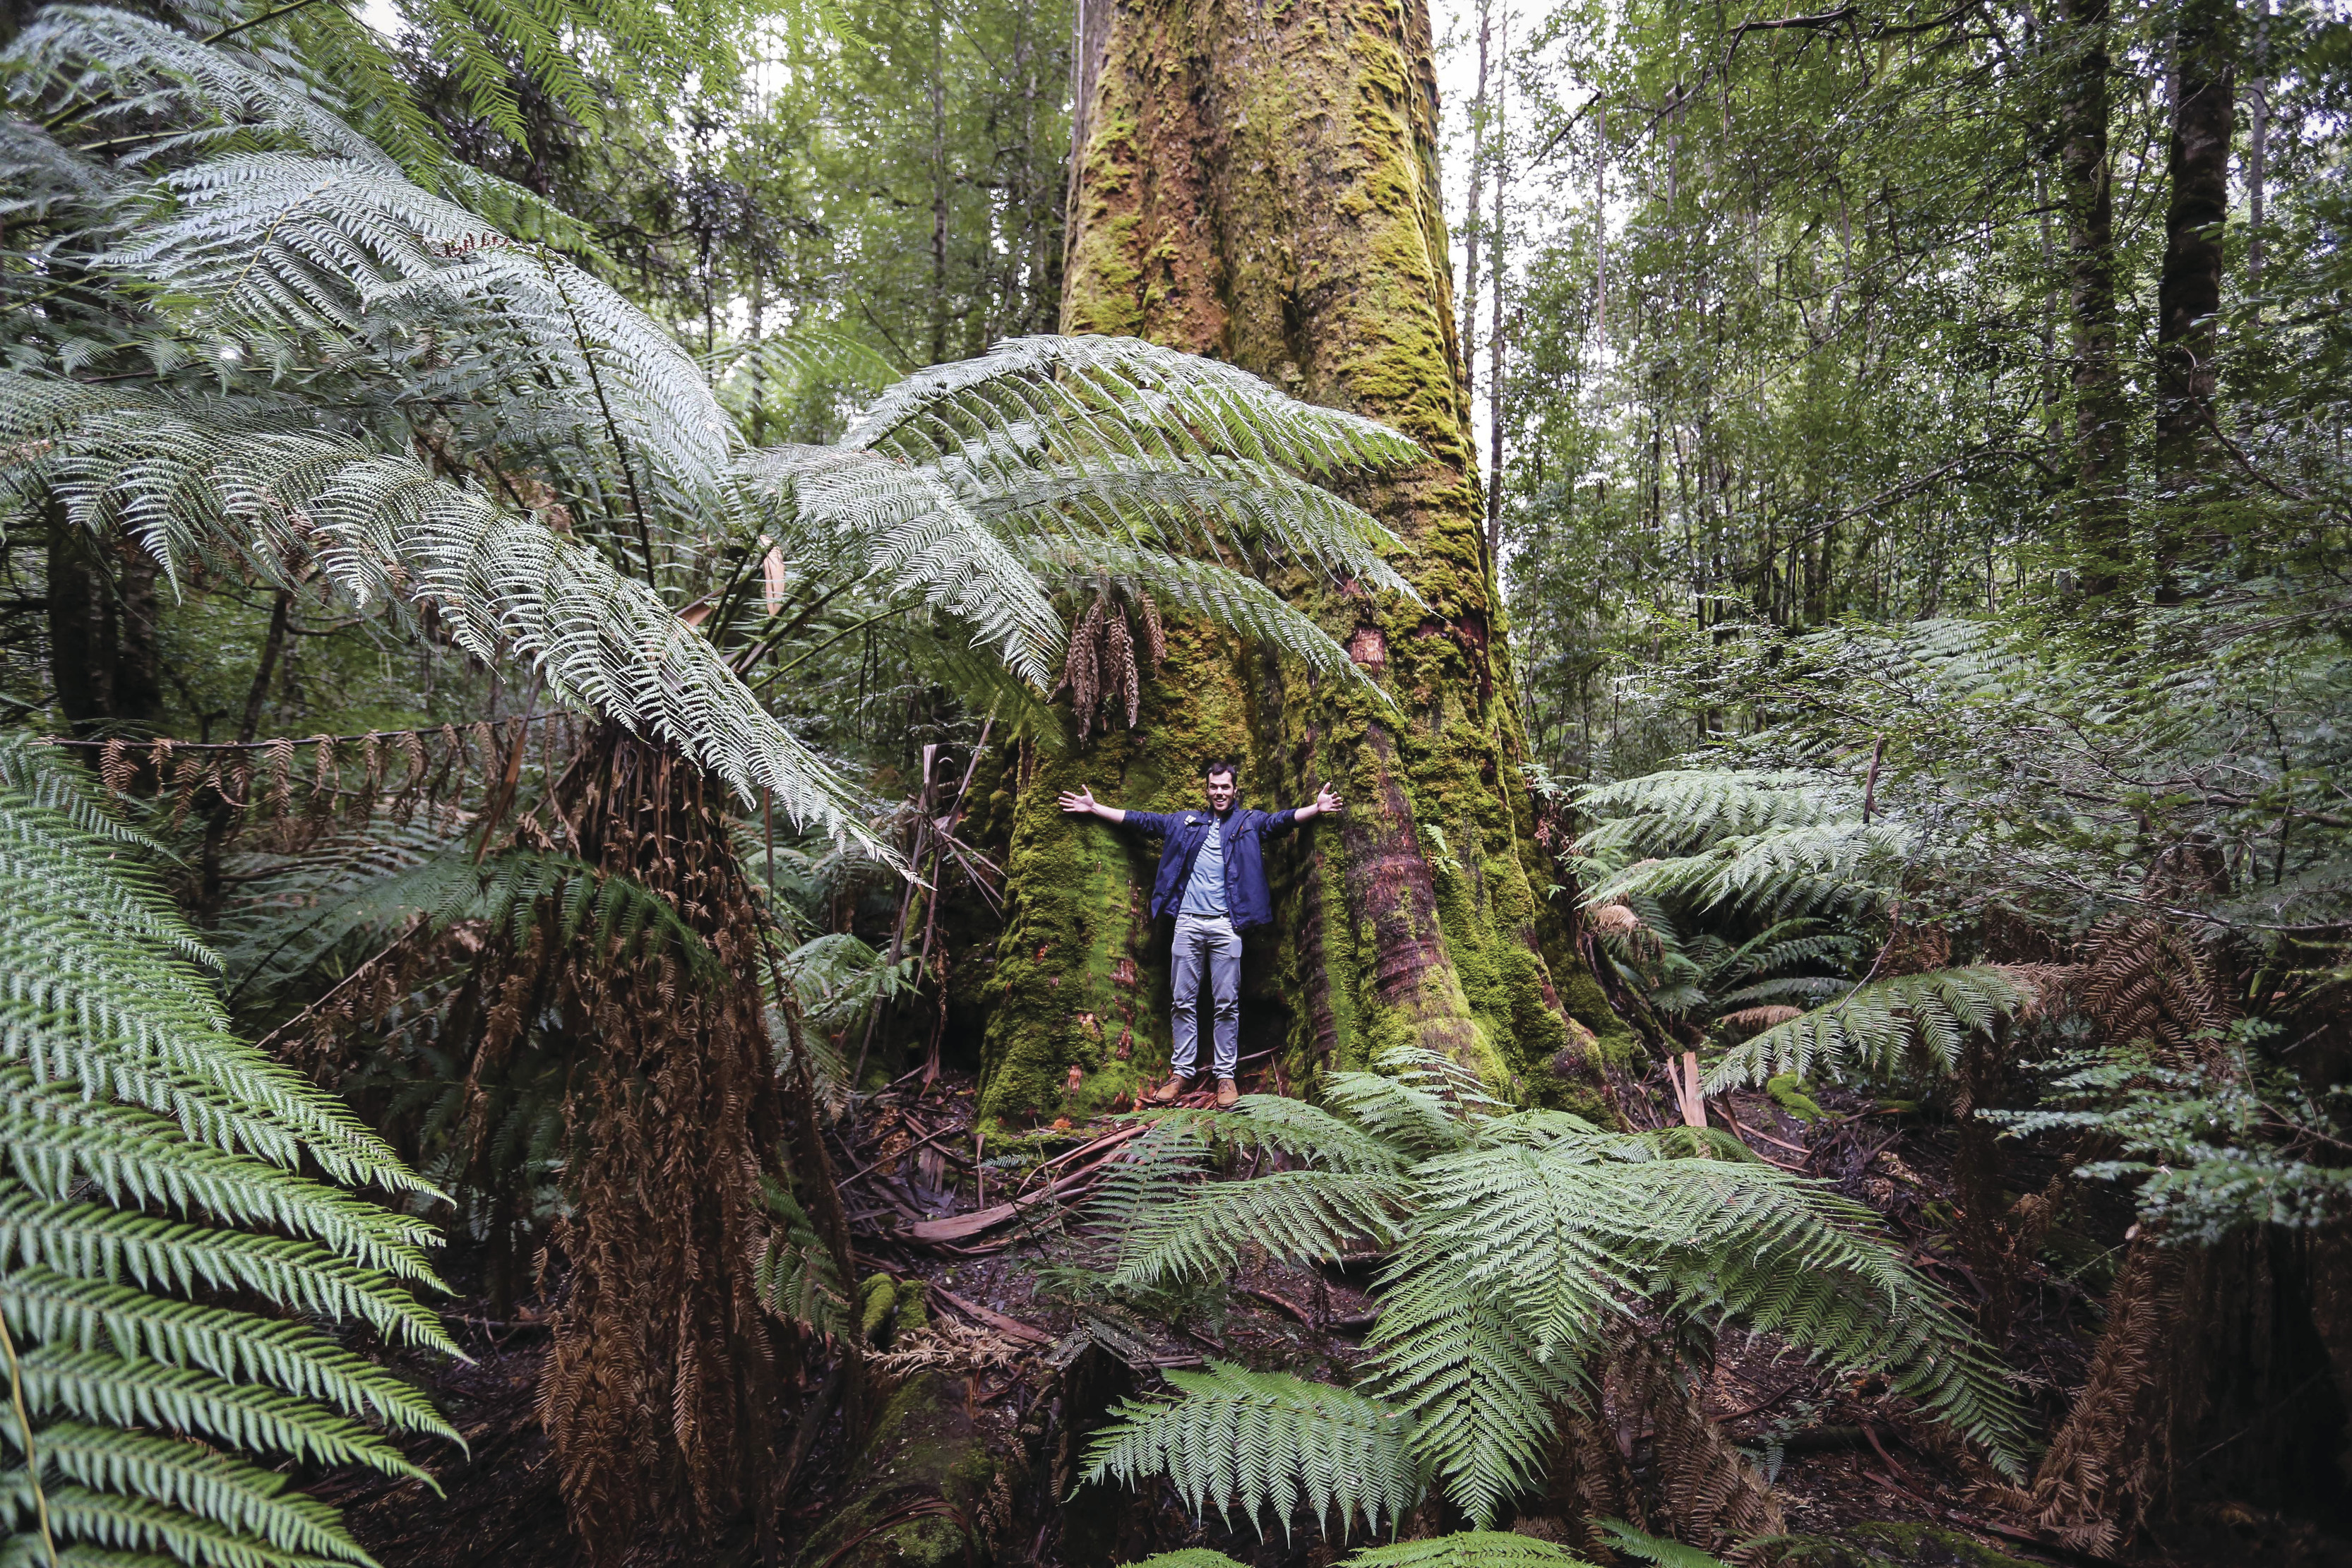 Man standing below a towering Eucalyptus regnan, also known as giant ash, at Styx Big Tree Reserve.